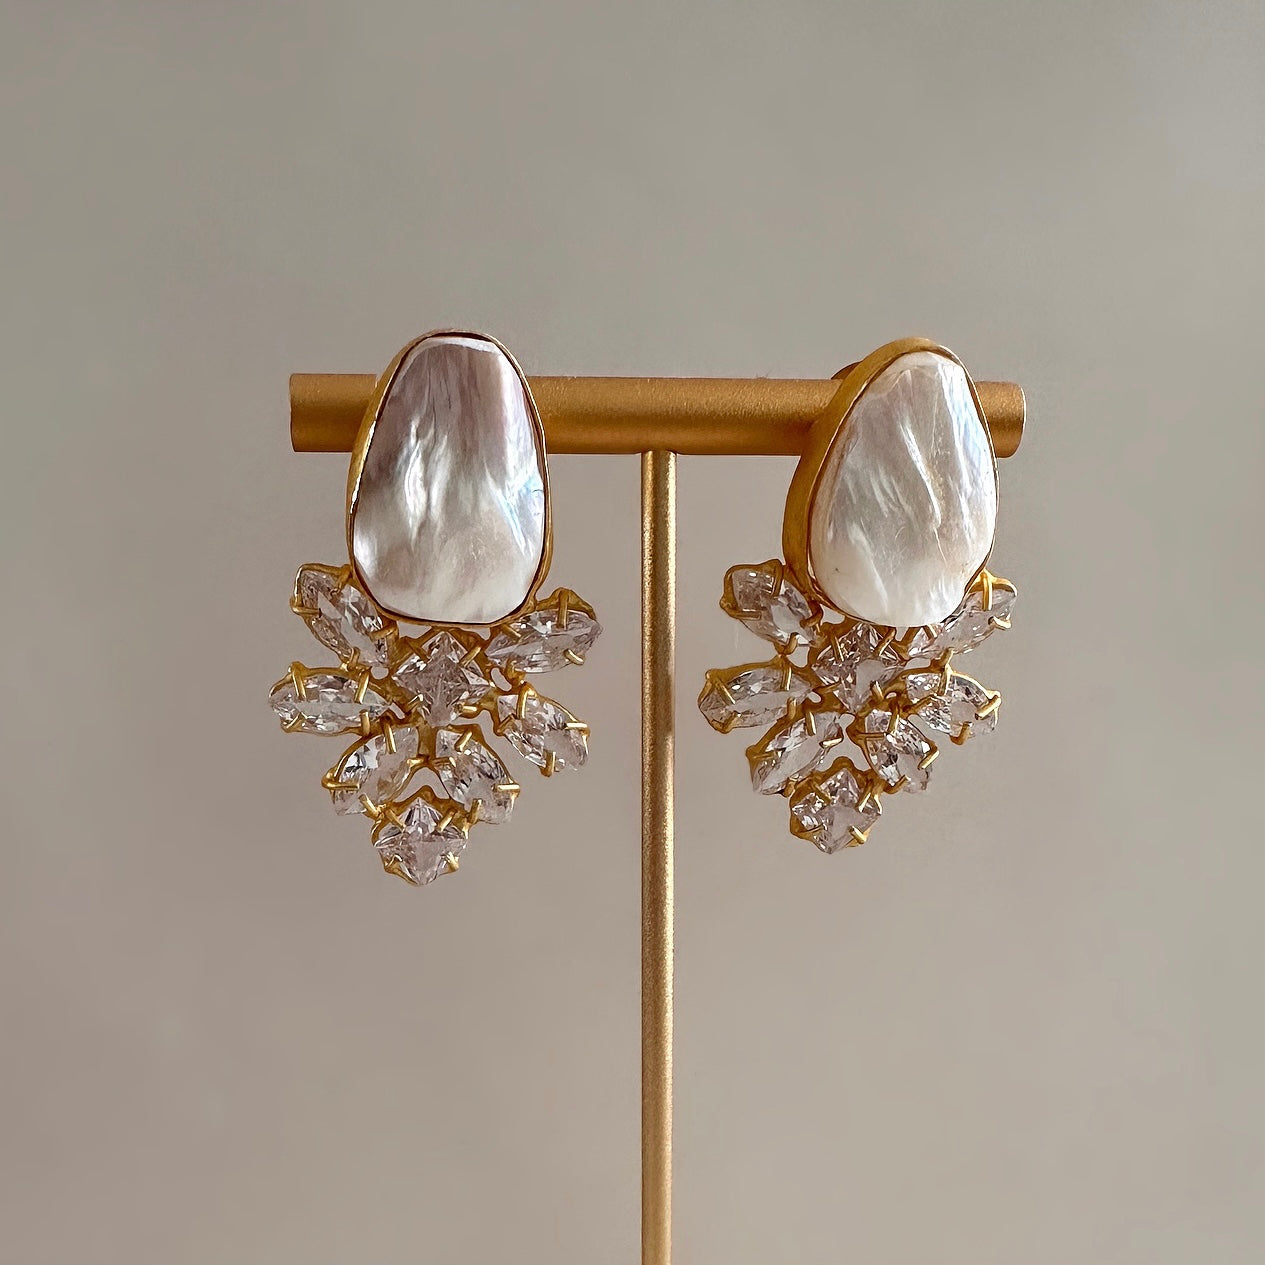 Adorn your ears with these opulent Baroque Crystal Earrings. Perfectly constructed with lustrous baroque pearls and dazzling CZ crystals, these earrings will add a sophisticated shine and sparkle to any ensemble. Show off your exquisite taste in luxury with these stylish crystal earrings. Earring drop 4.5cm Shape of pearls may vary